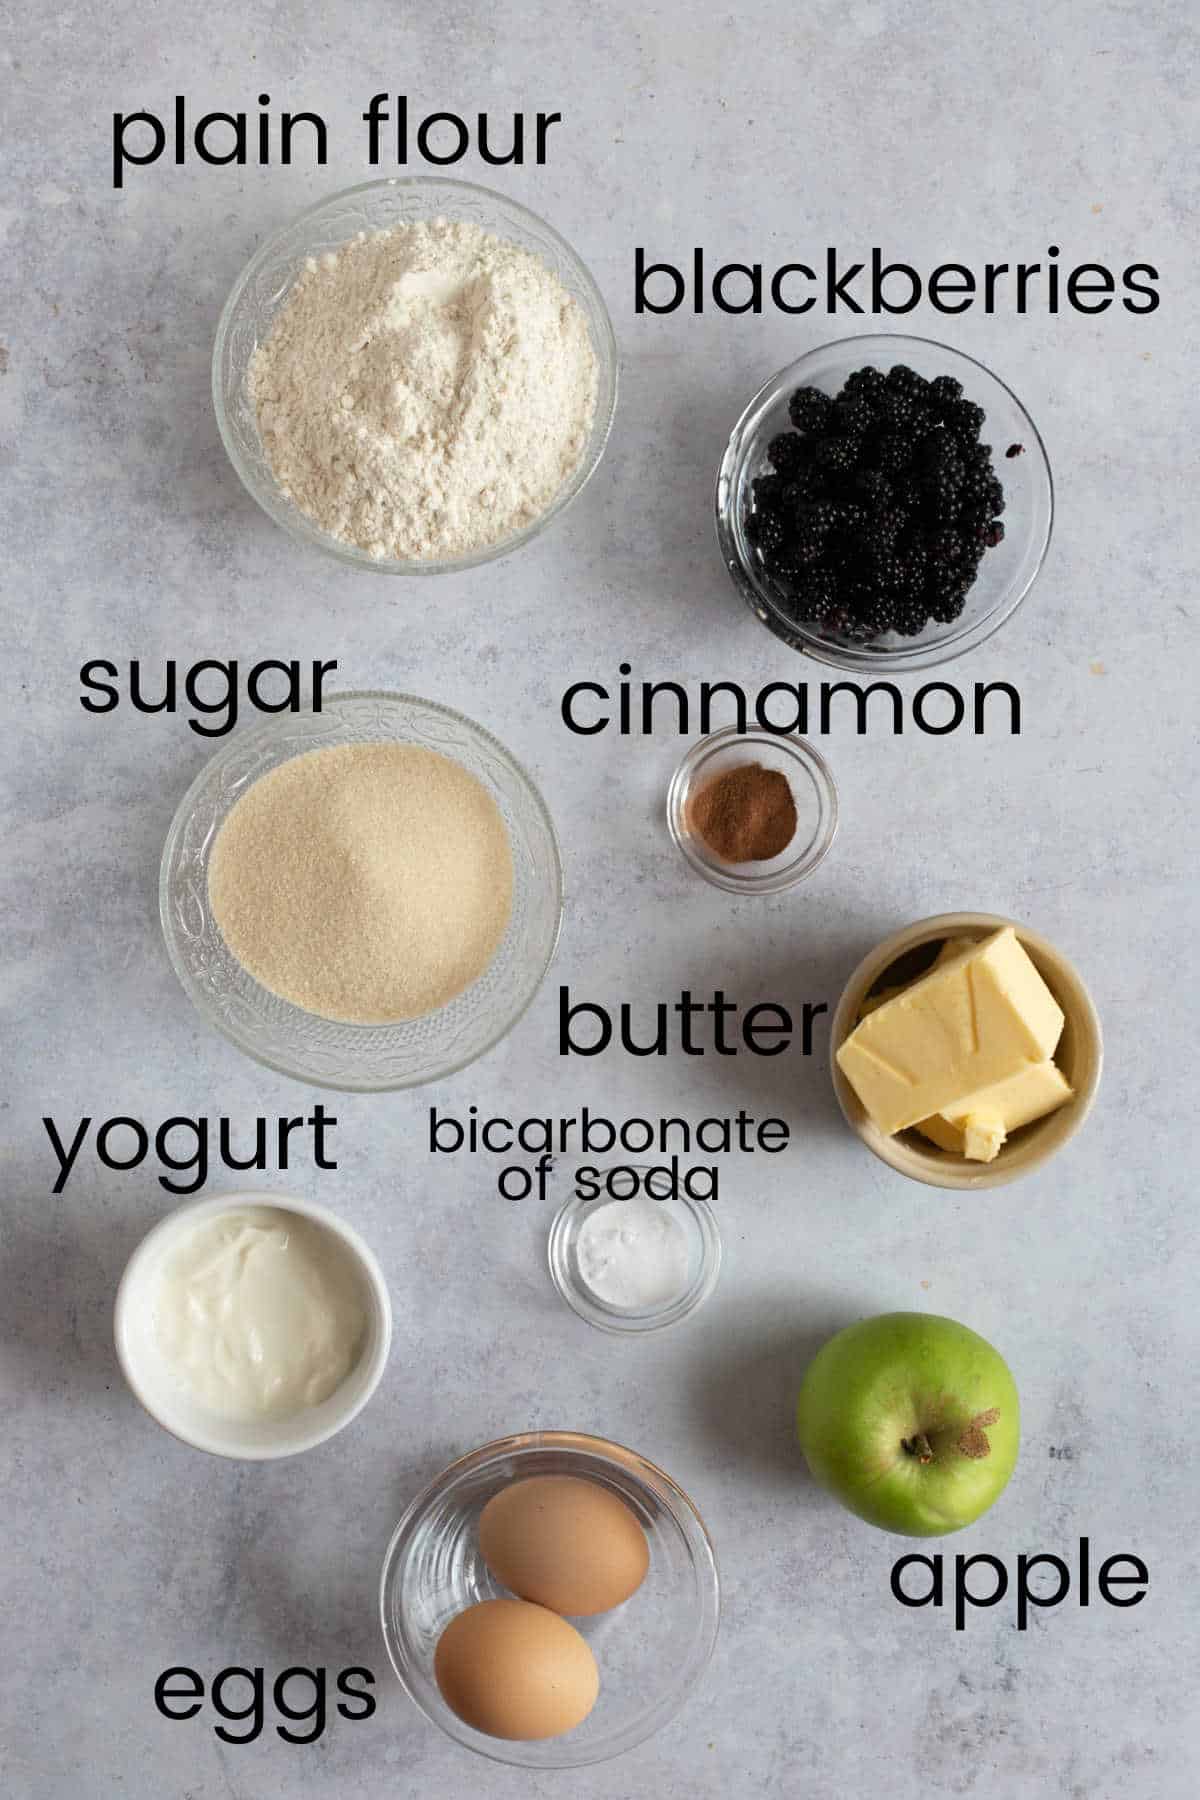 Ingredients for apple and blackberry muffins.